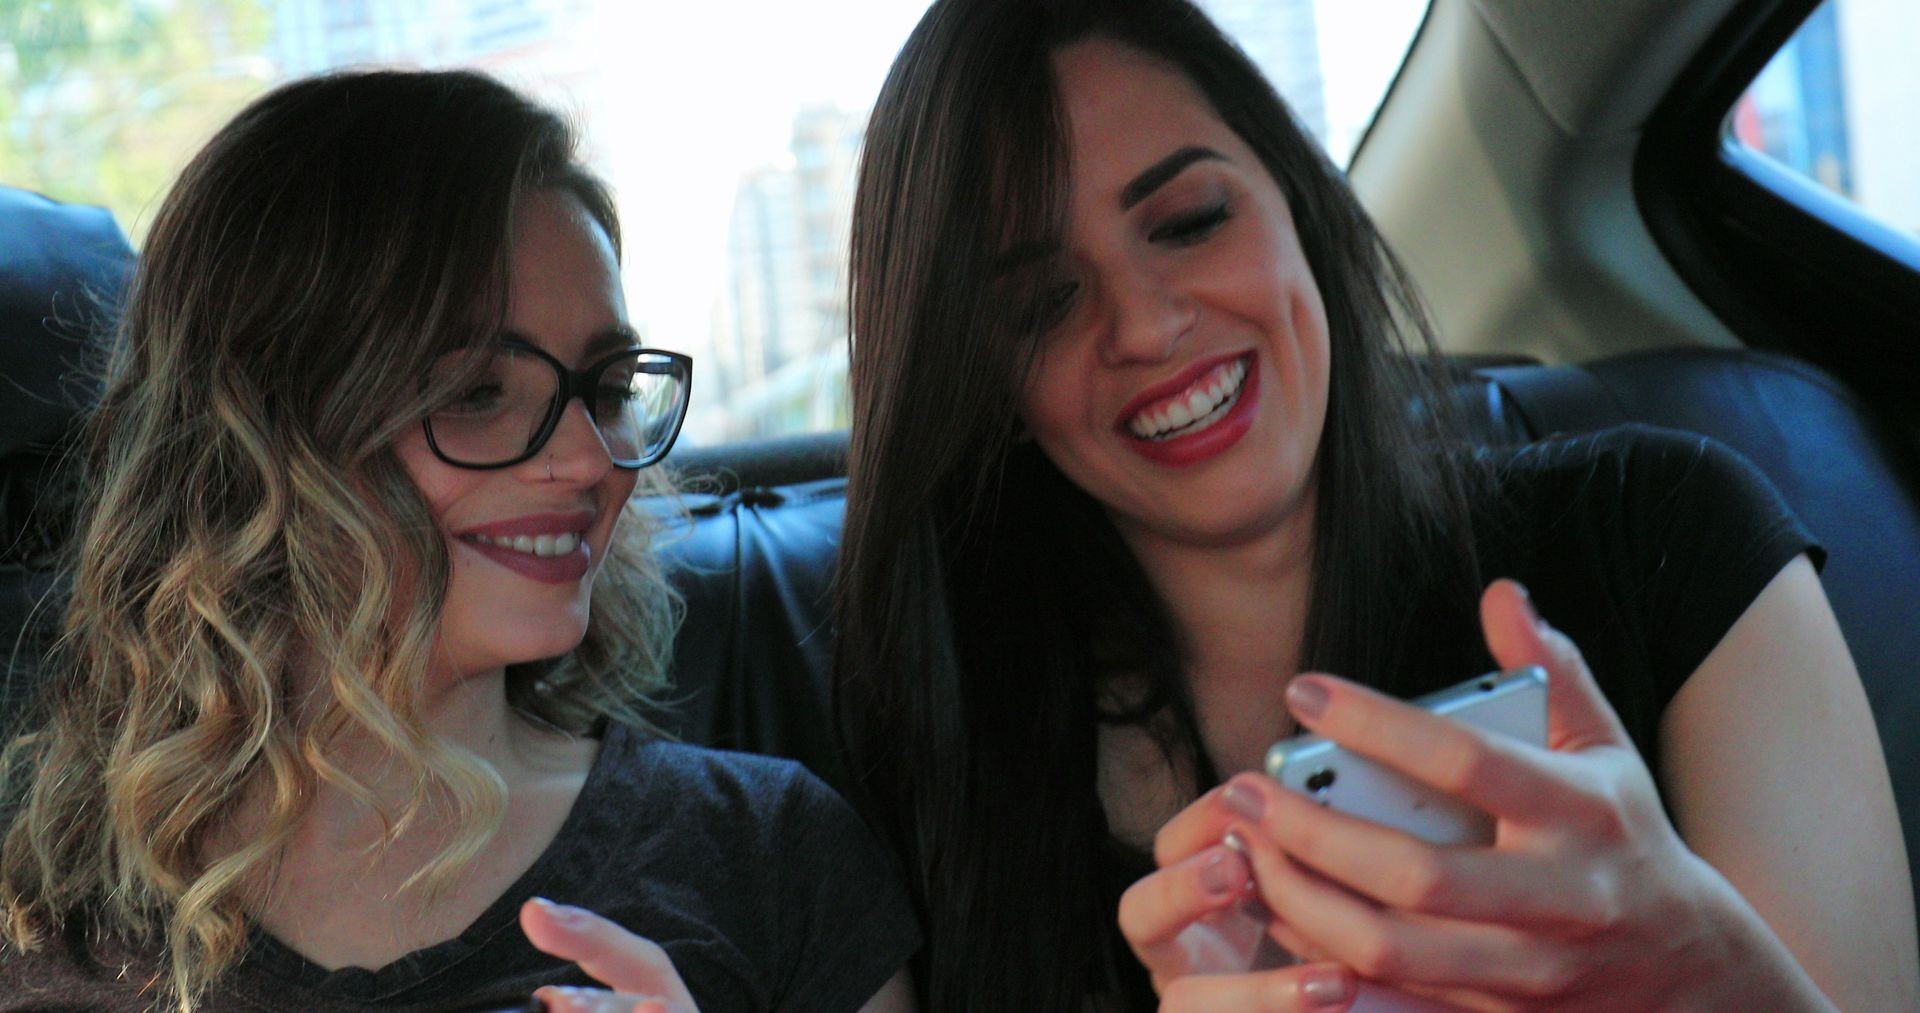 Candid girlfriends in the back seat of a car sharing cellphone screen showing content. Friends together riding taxi cab holding smartphone